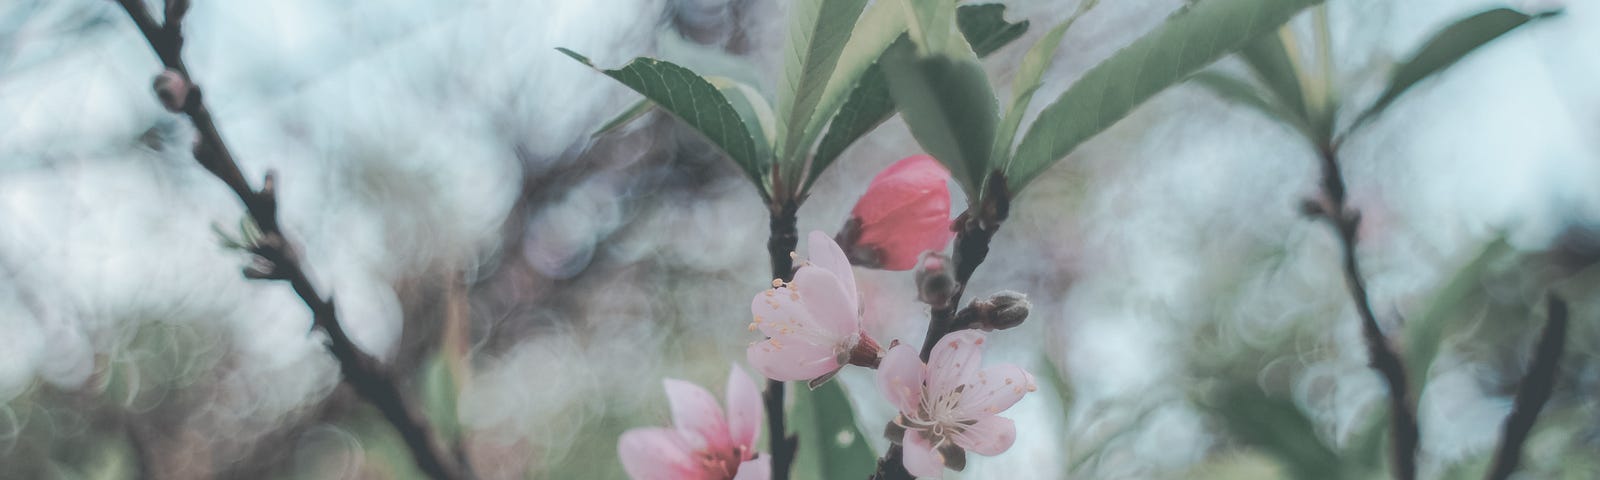 Close up of pale pink blossoms on an apple tree